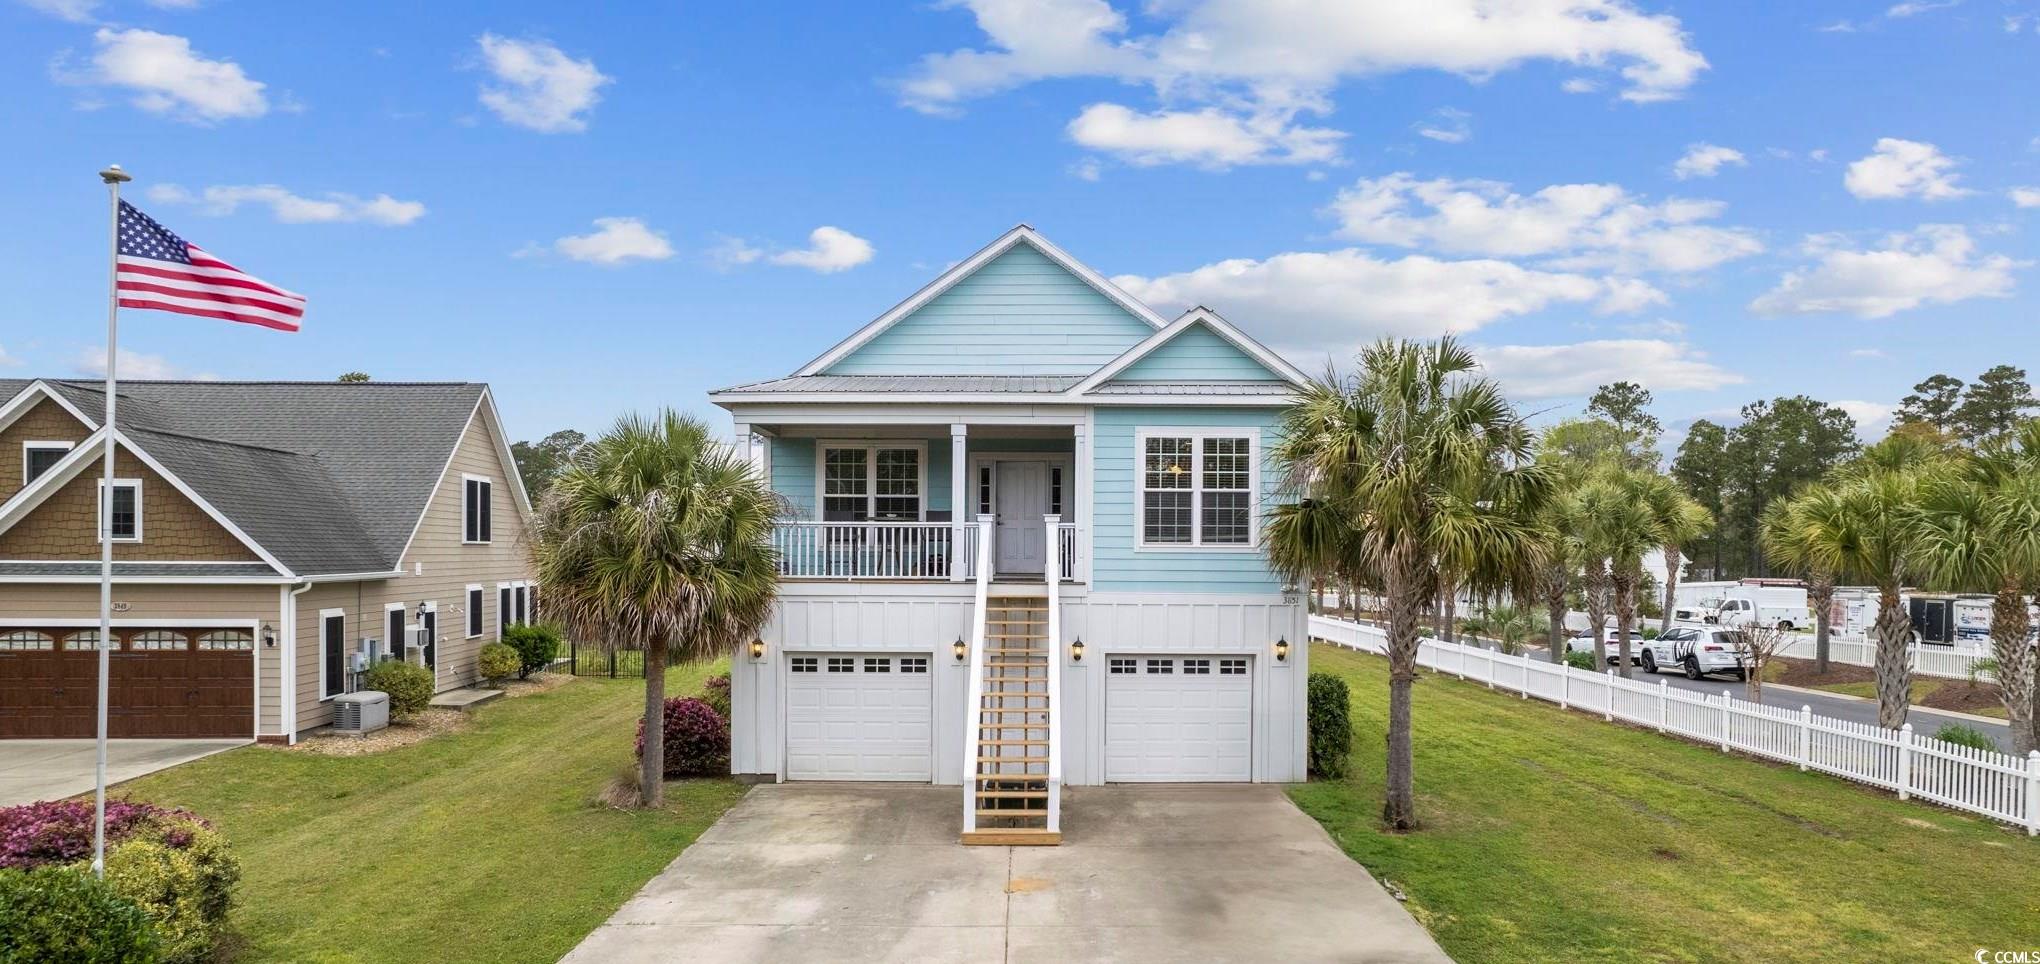 ***best location in murrells inlet*** located between the famous marsh walk/inlet and the wacca wache marina/intercoastal waterway! this beautiful custom built 5 bedroom & 3 full bath home is waiting for you! no hoa here! bring your boat, golf cart and rv!  open floor plan with lots of natural light. the main living area hosts a master bedroom suite, 1 large bedroom, as well as a full guest bathroom, kitchen, living room, dining room and laundry room. downstairs you will find 3 other large bedrooms, the 5th bedroom /mother in law suite has its own bar/sink area that easily can be a kitchenette.  enjoy the huge backyard with plenty of space to entertain and cook out on your front balcony. attached oversized 2 car garage with plenty of extra parking in front as well! this is the place you want to be located here in the inlet! you are conveniently situated off hwy 17, you're just minutes away from the beach, the marshwalk, brookgreen gardens, huntington beach state park, premier golfing, shopping, dining, and entertainment.  book your showing today! welcome home!